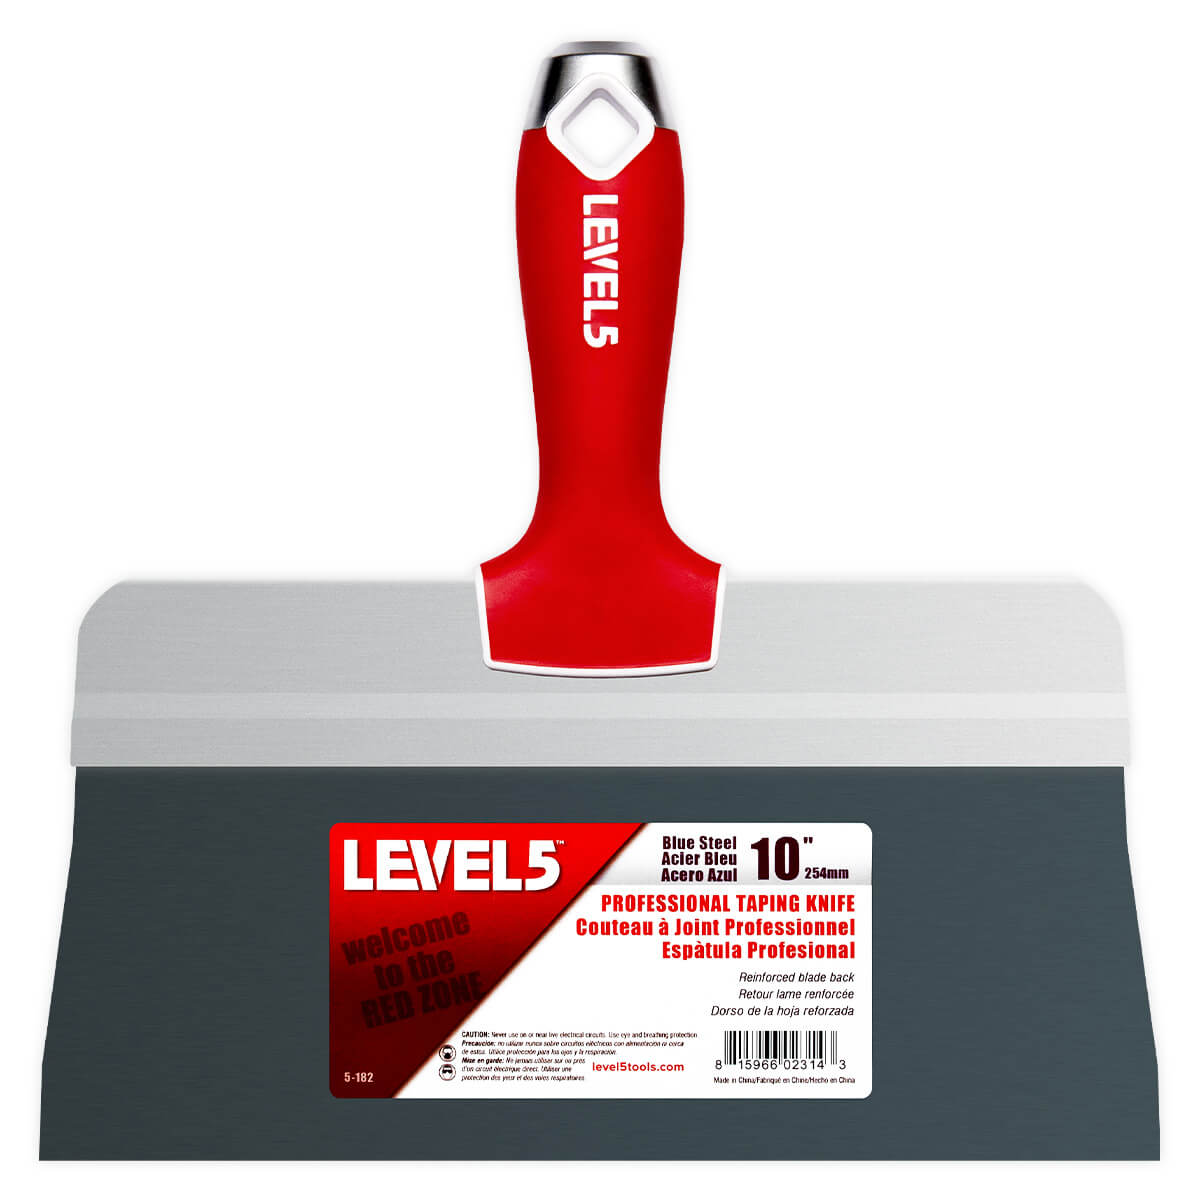 Level 5 Blue Steel Big Back Taping Knives